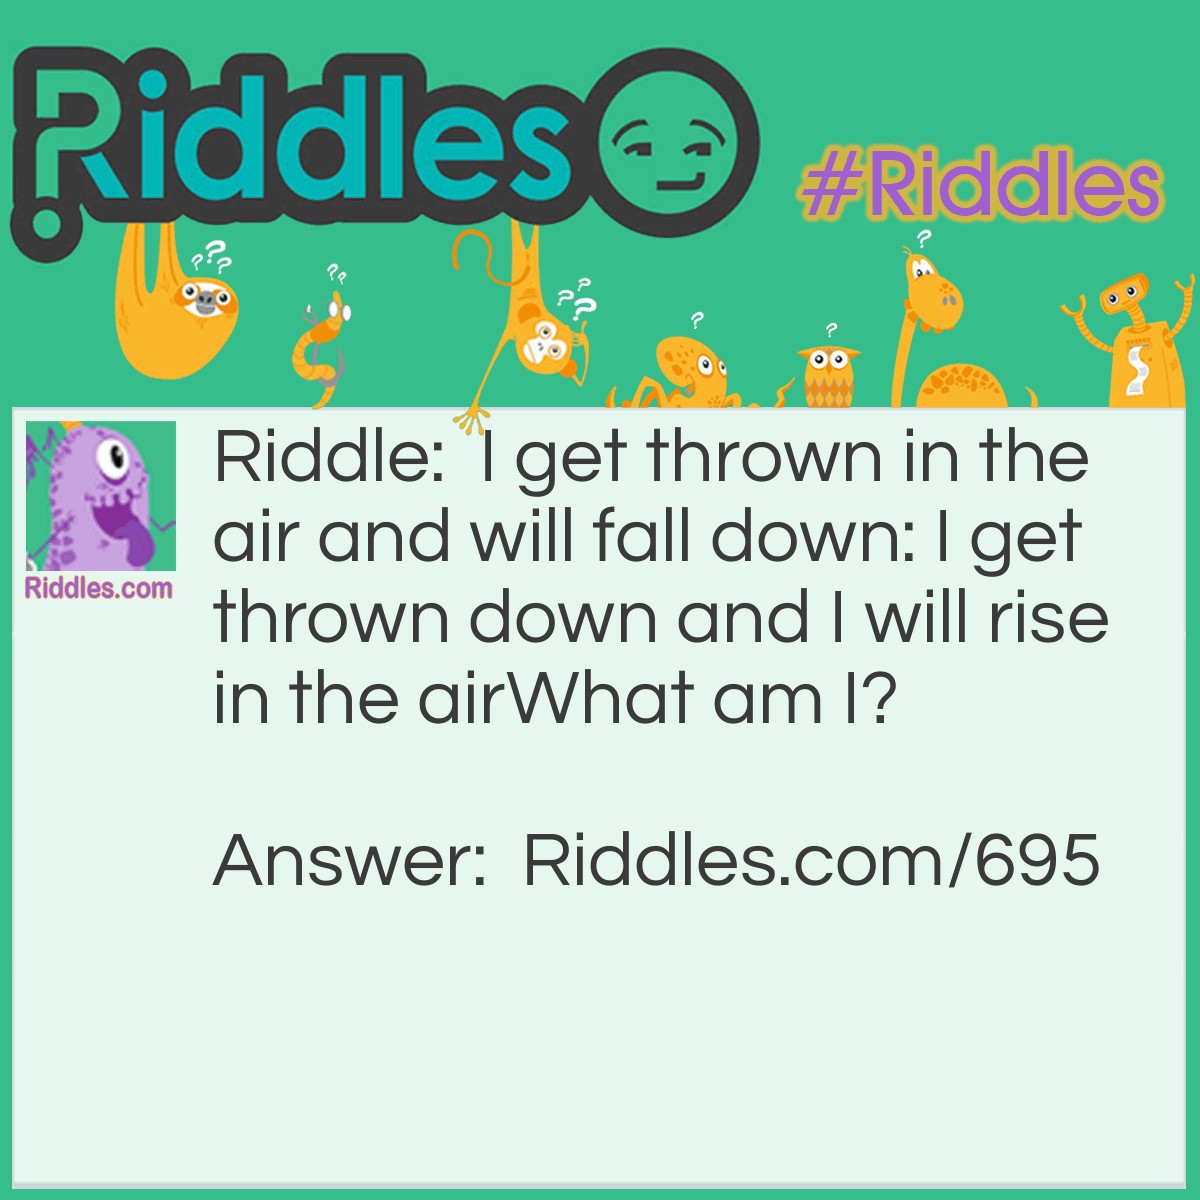 Riddle: I get thrown in the air and will fall down: I get thrown down and I will rise in the air
What am I? Answer: A rubber ball.